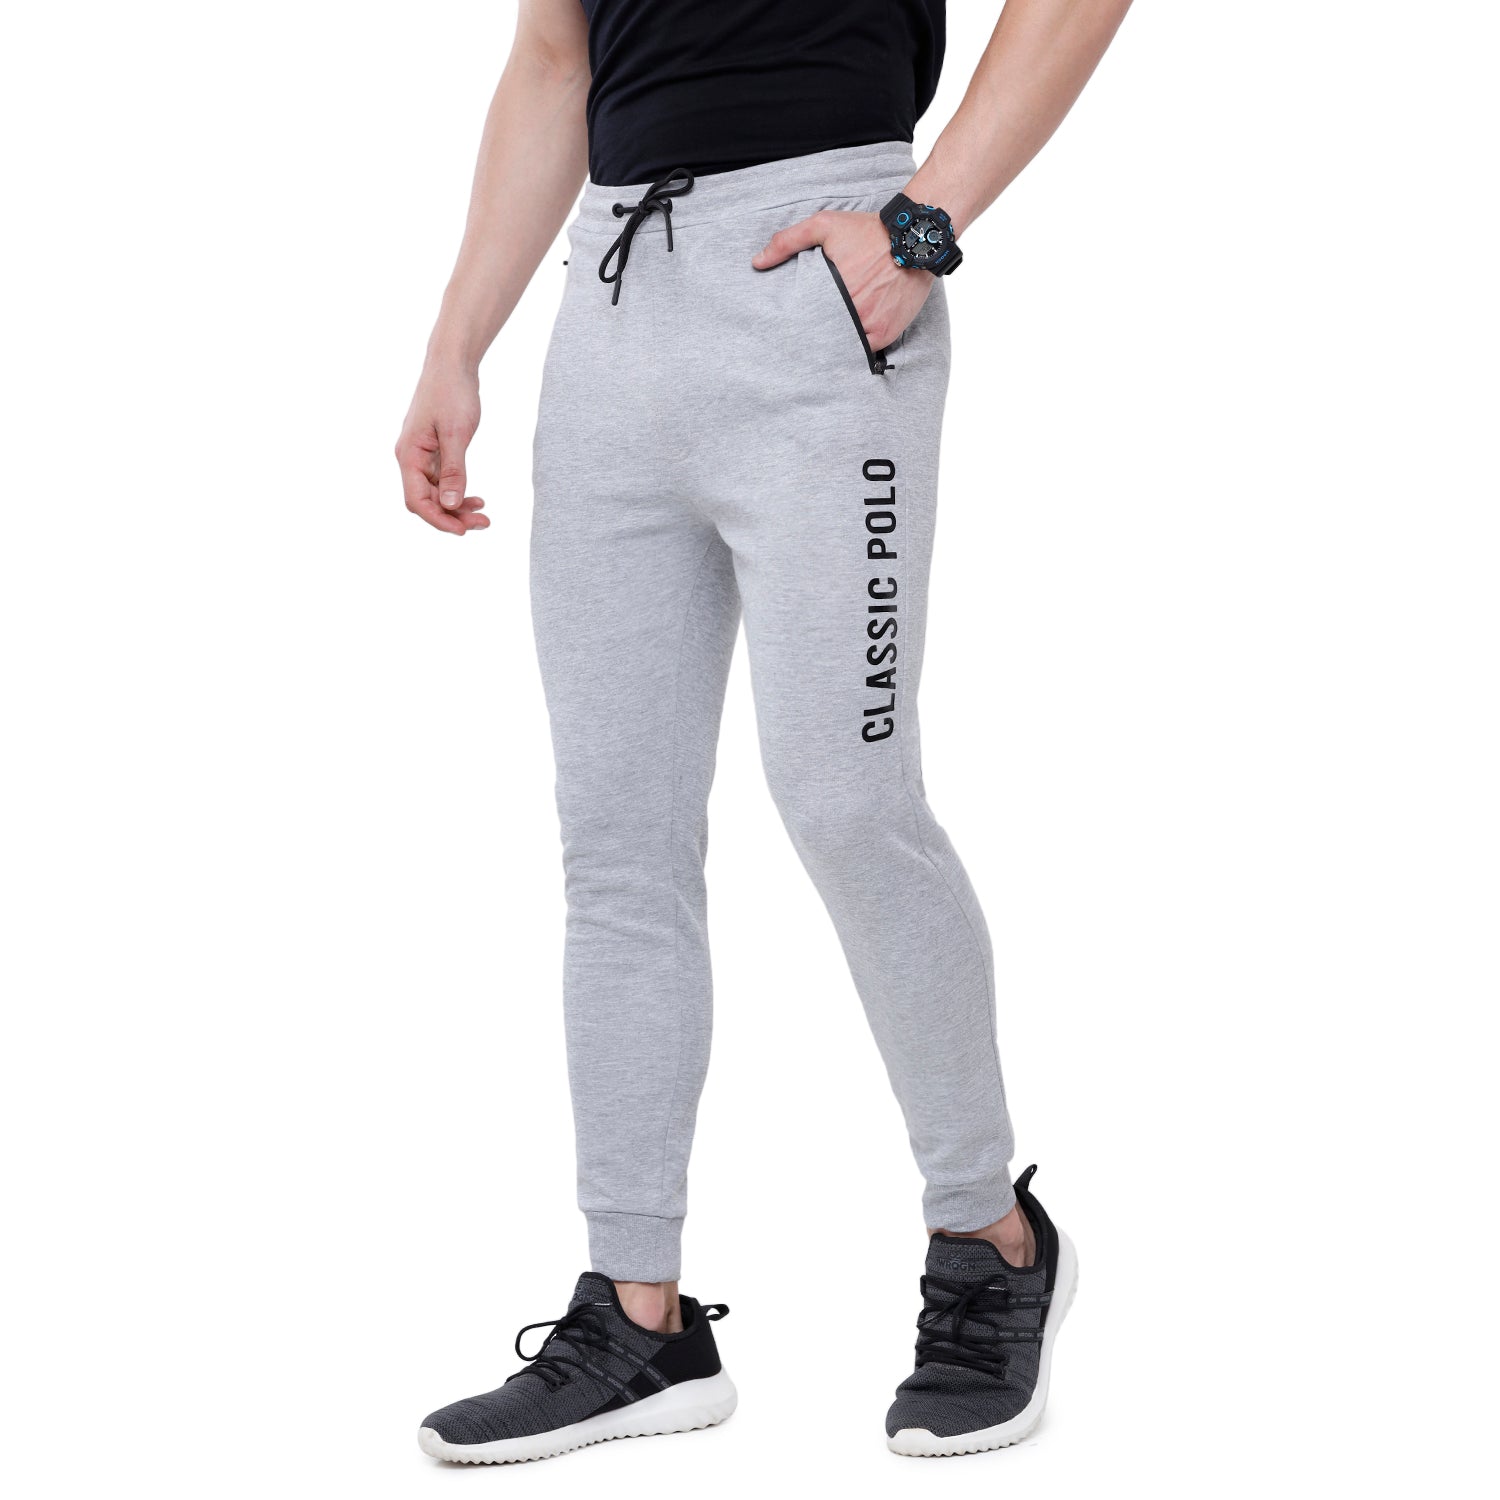 Classic Polo Men's White Solid Mélange Slim Fit Trendy Jogger Pant - Gioz-02 C Track Pants Classic Polo 